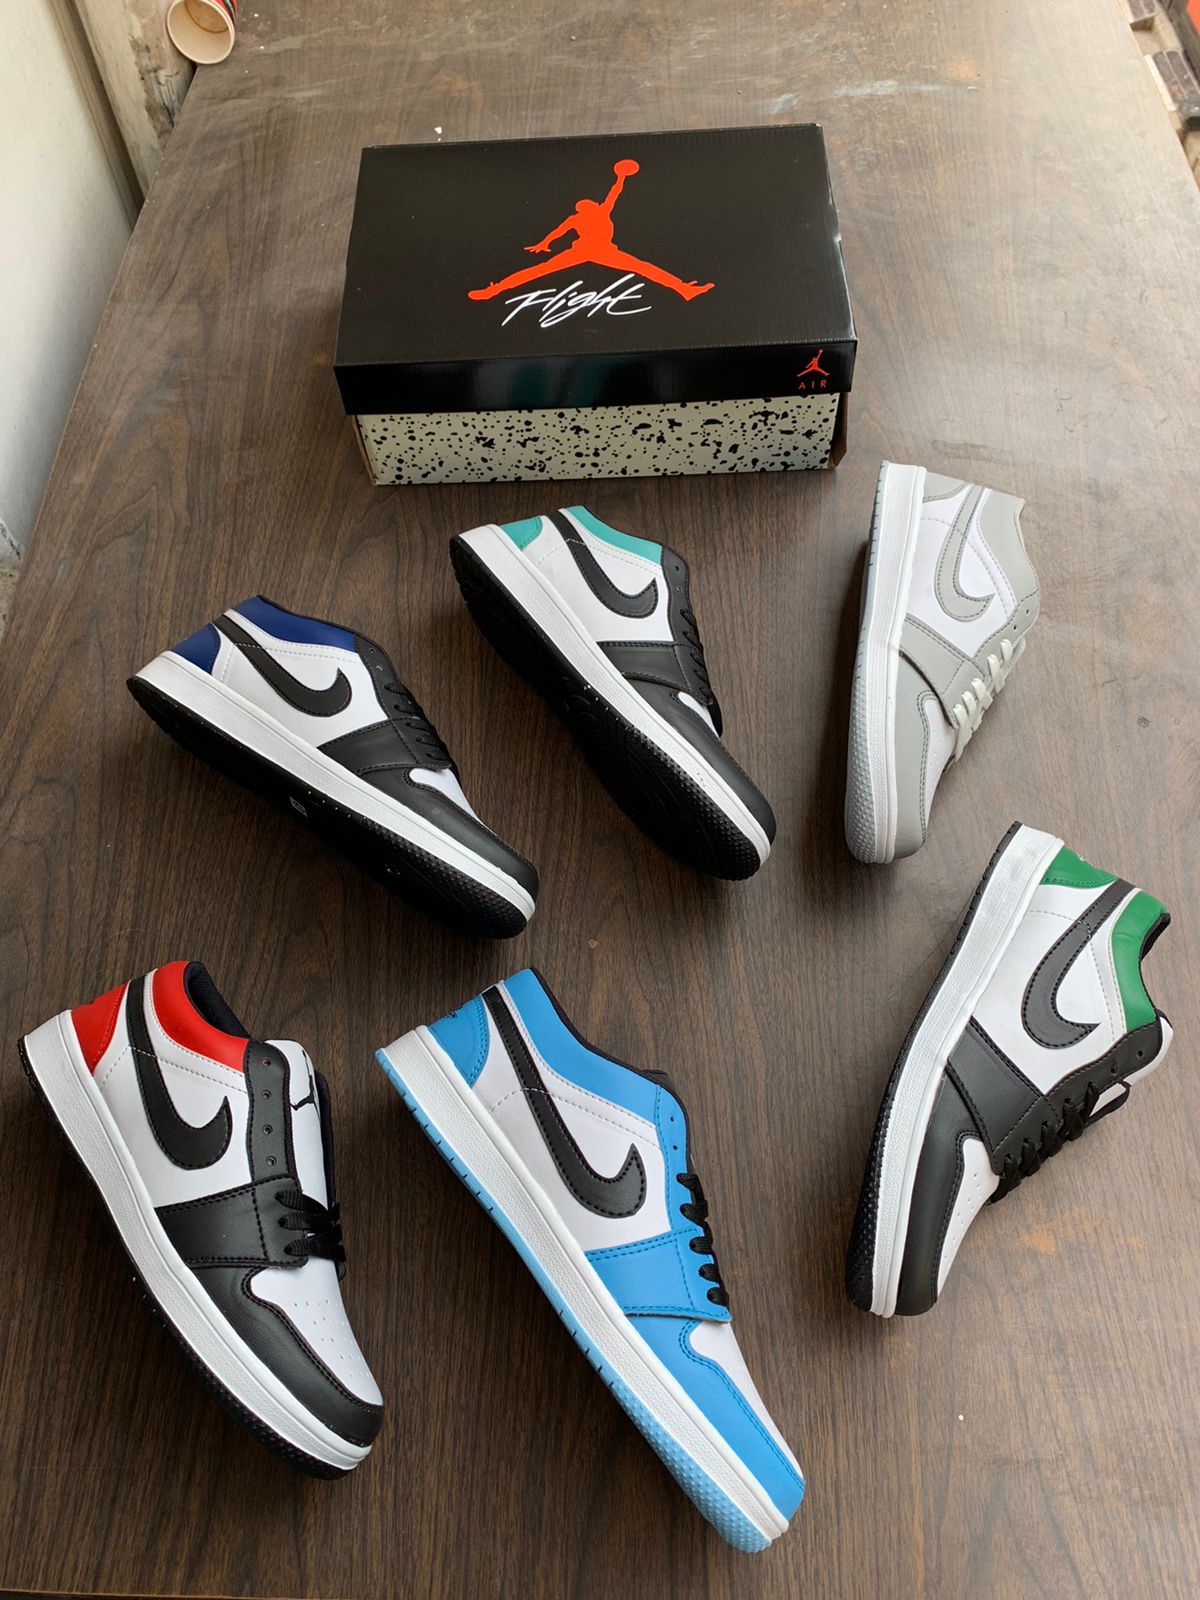 Adepto semilla haga turismo First copy Nike air jordan shoes on sale for 999 | First copy shoe